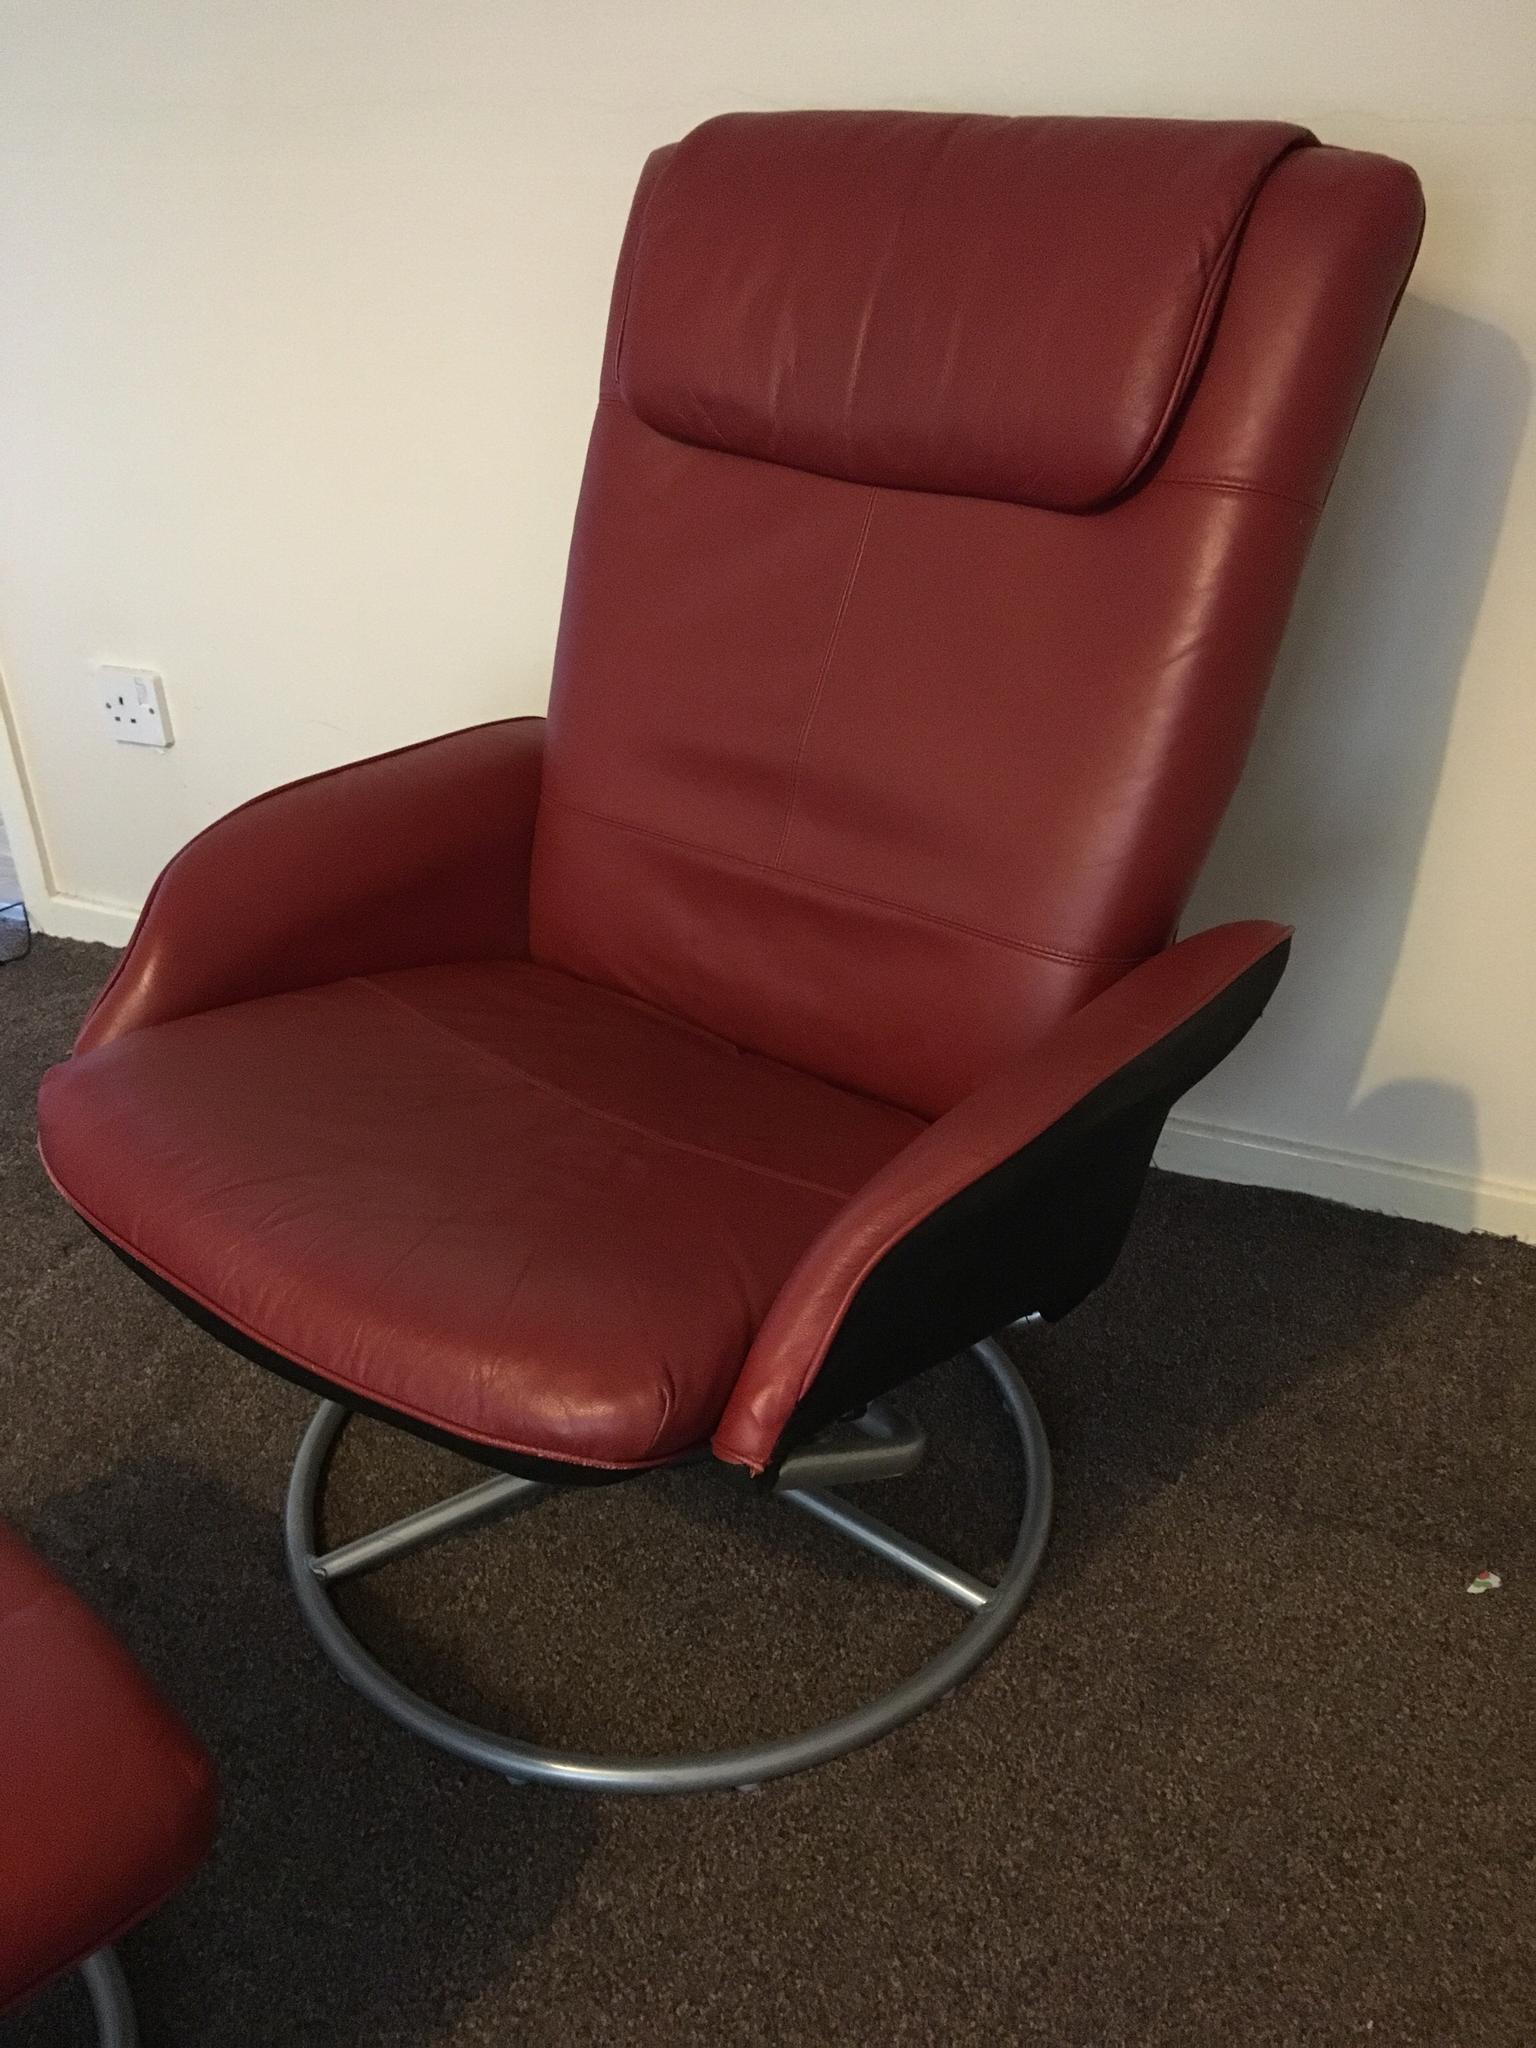 Red Leather Swivel Chair And Footstool, Ikea Leather Chair With Ottoman